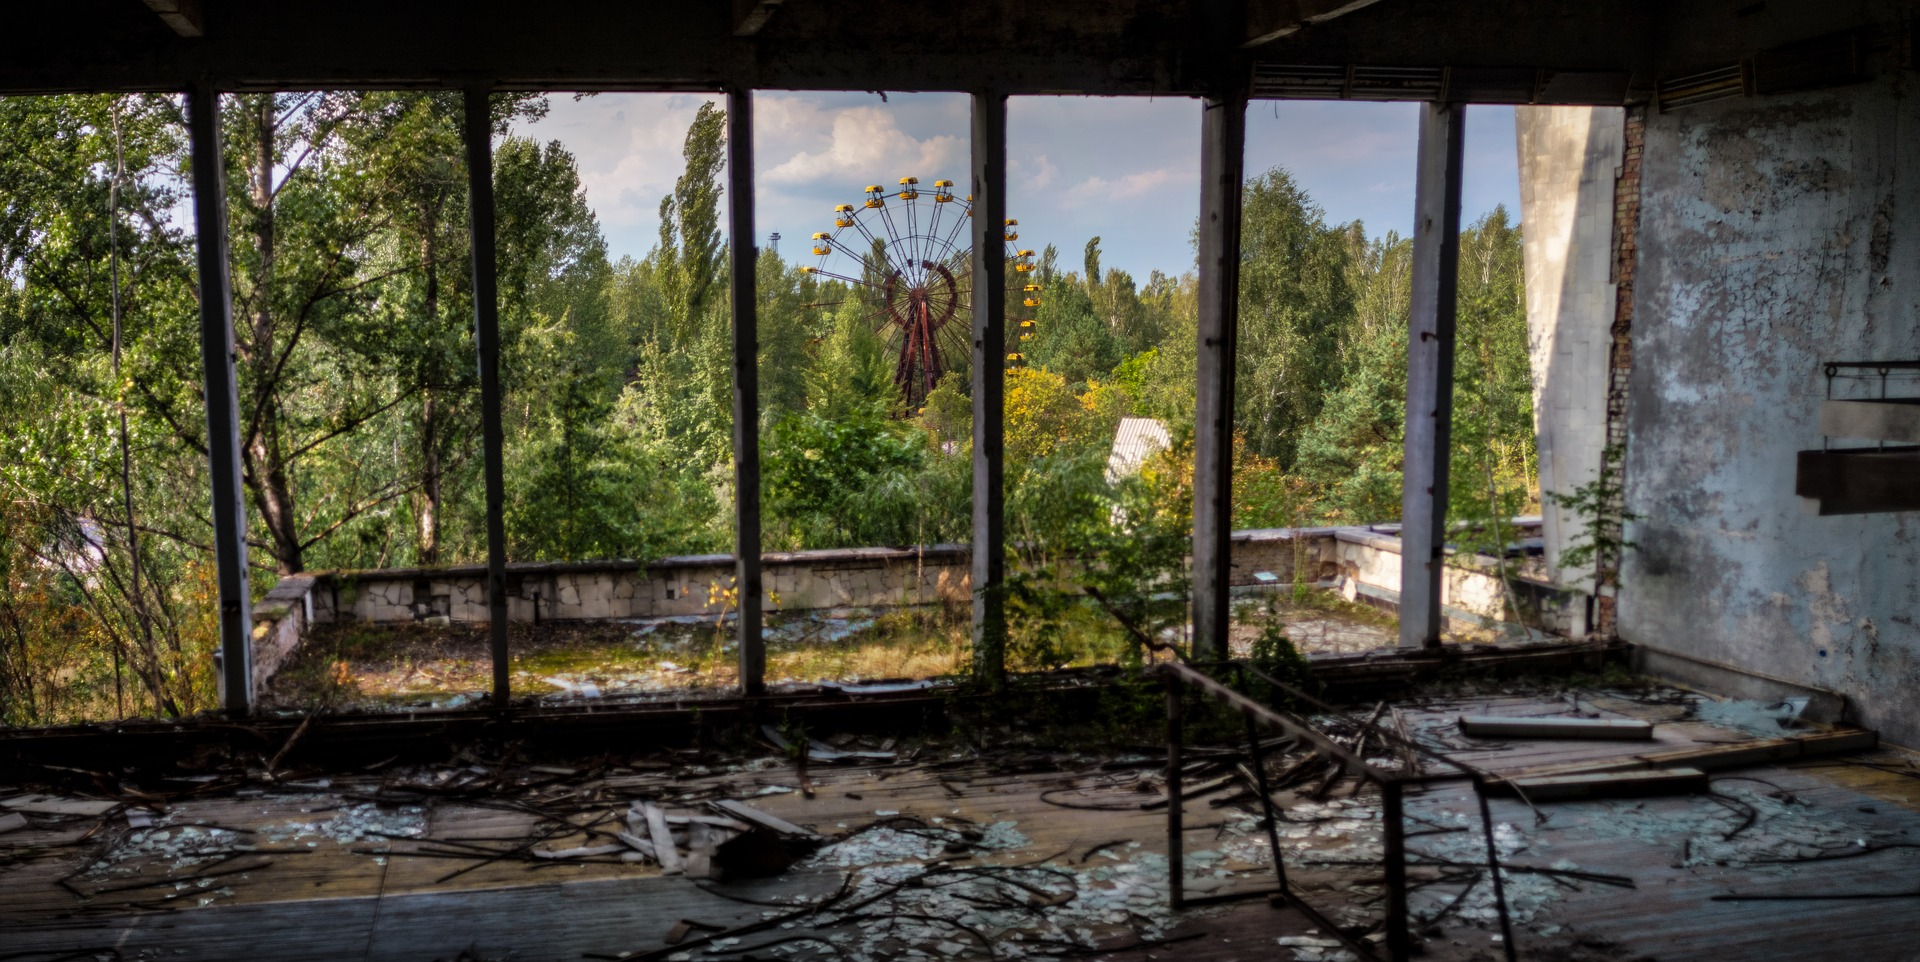 Photograph of Pripyat ferris wheel from inside abandoned building